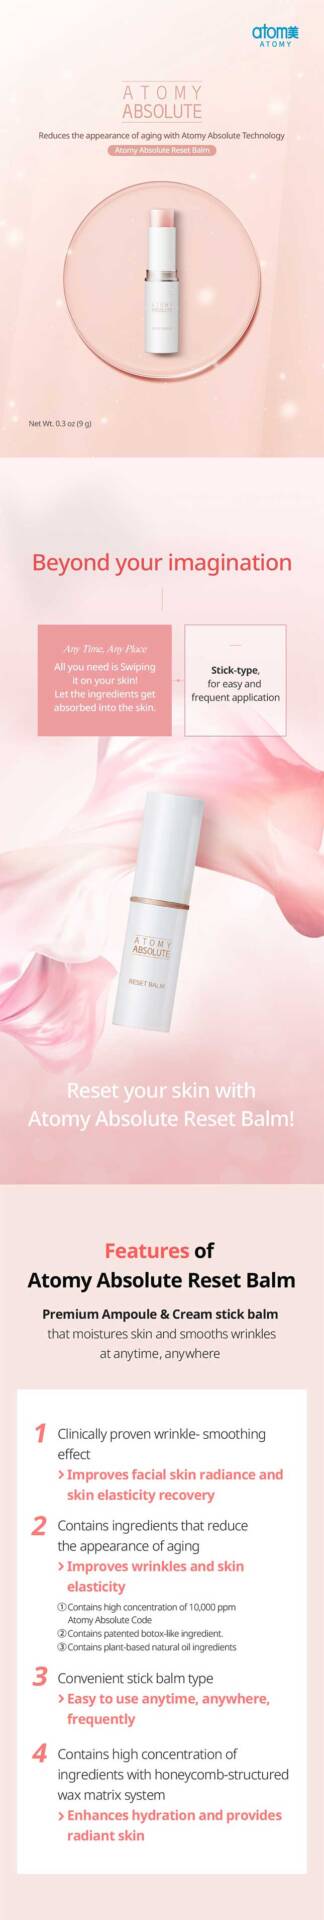 Atomy-Absolute-Reset-Balm-details